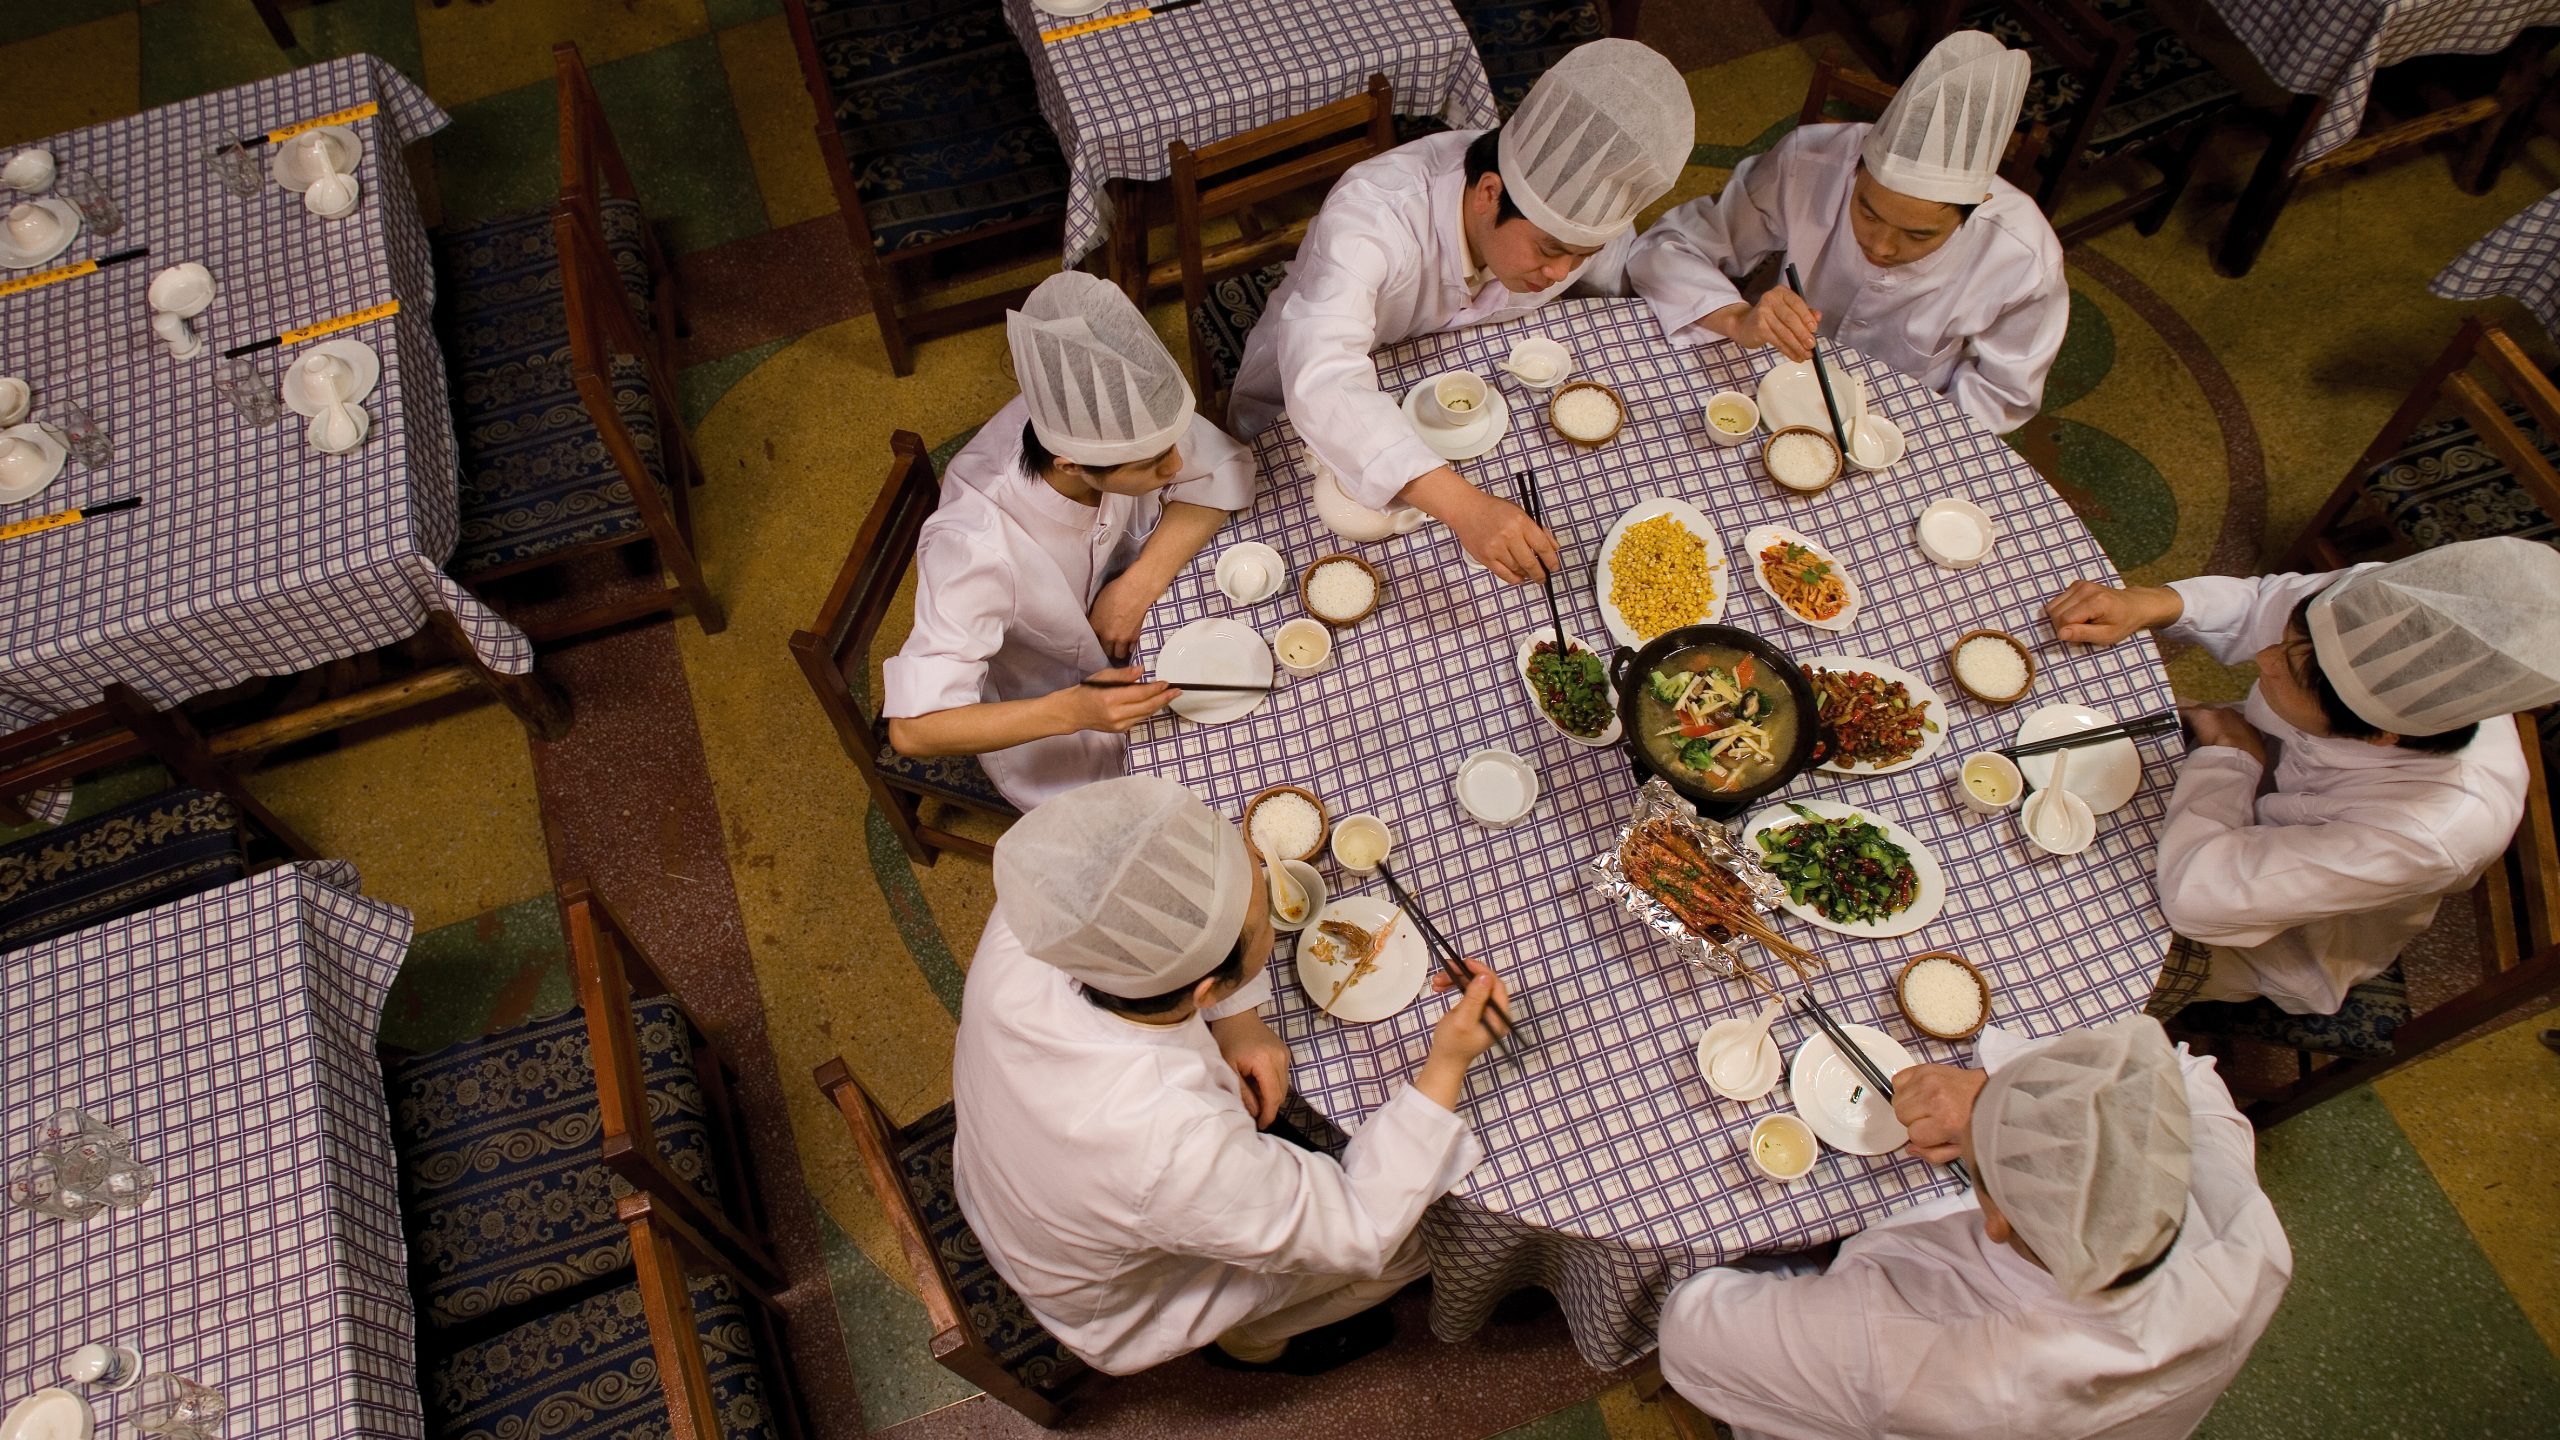 Chinese chefs having lunch together around a round table. Photographer Tuomas Harjumaaskola.